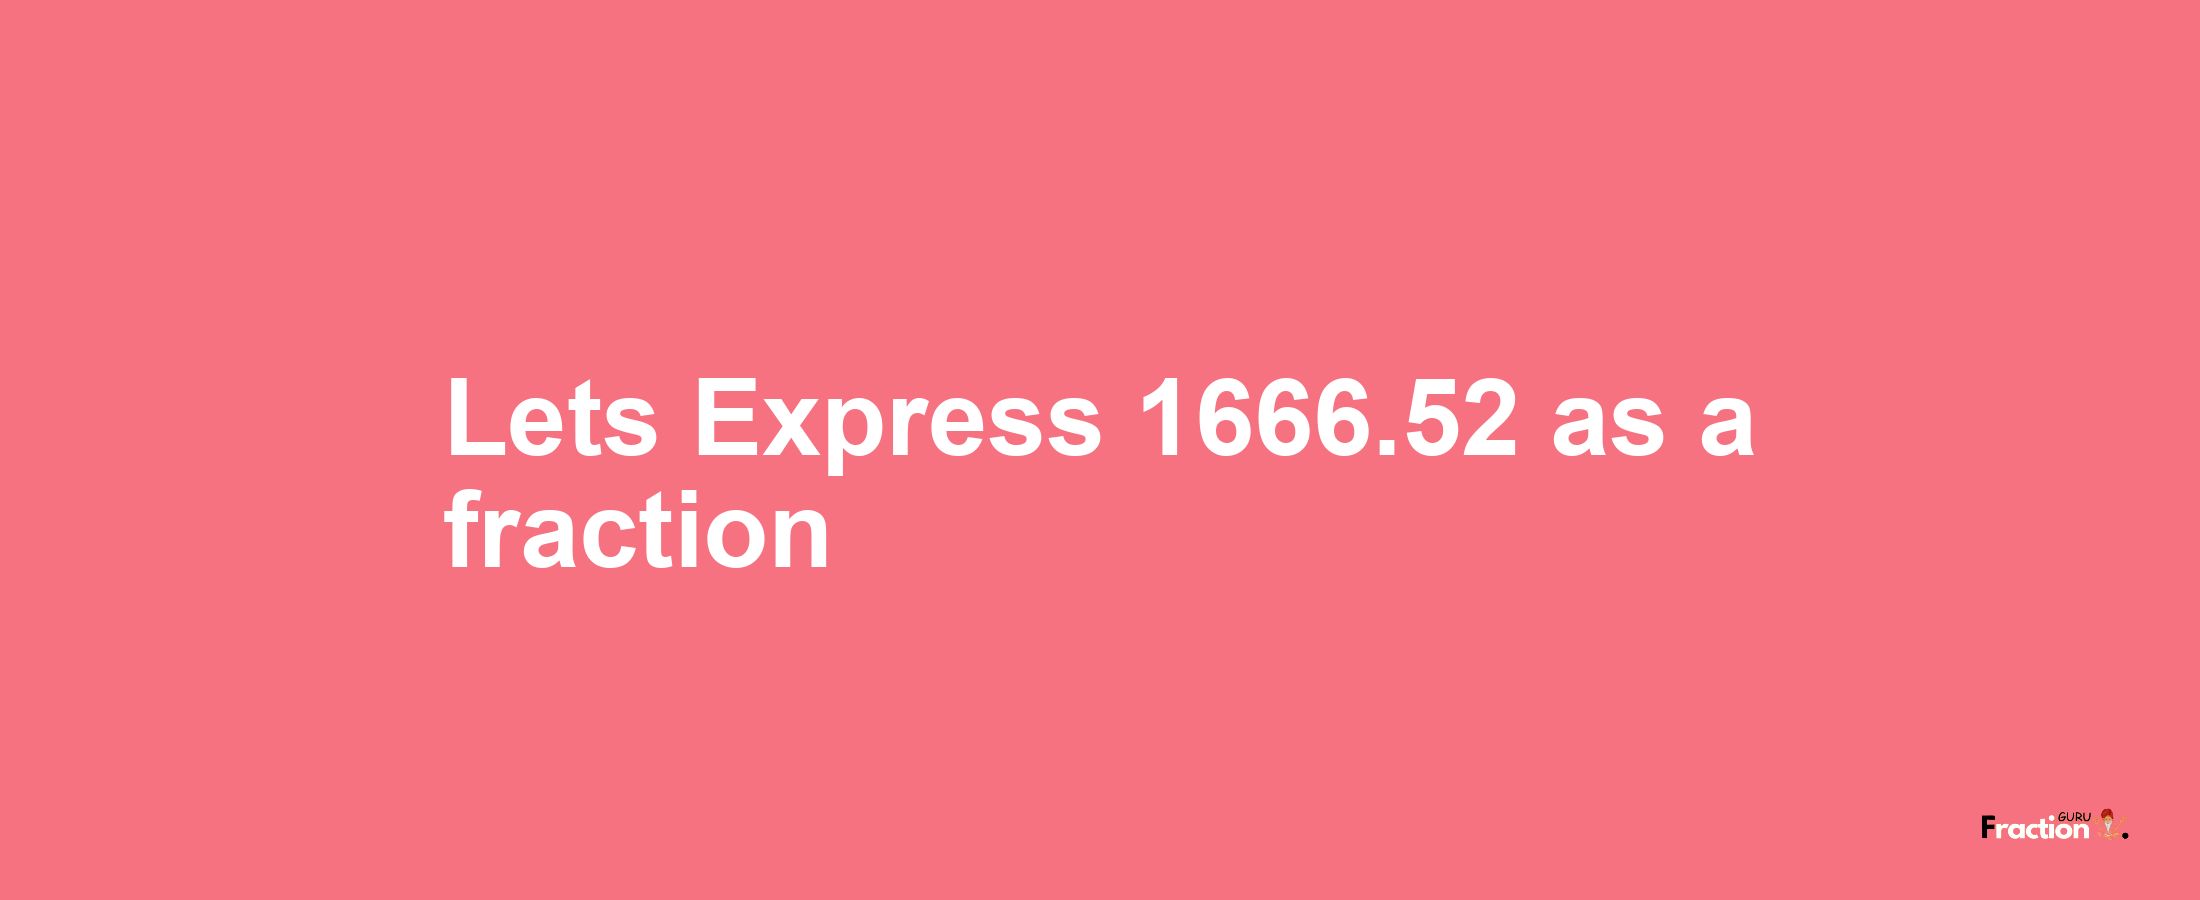 Lets Express 1666.52 as afraction